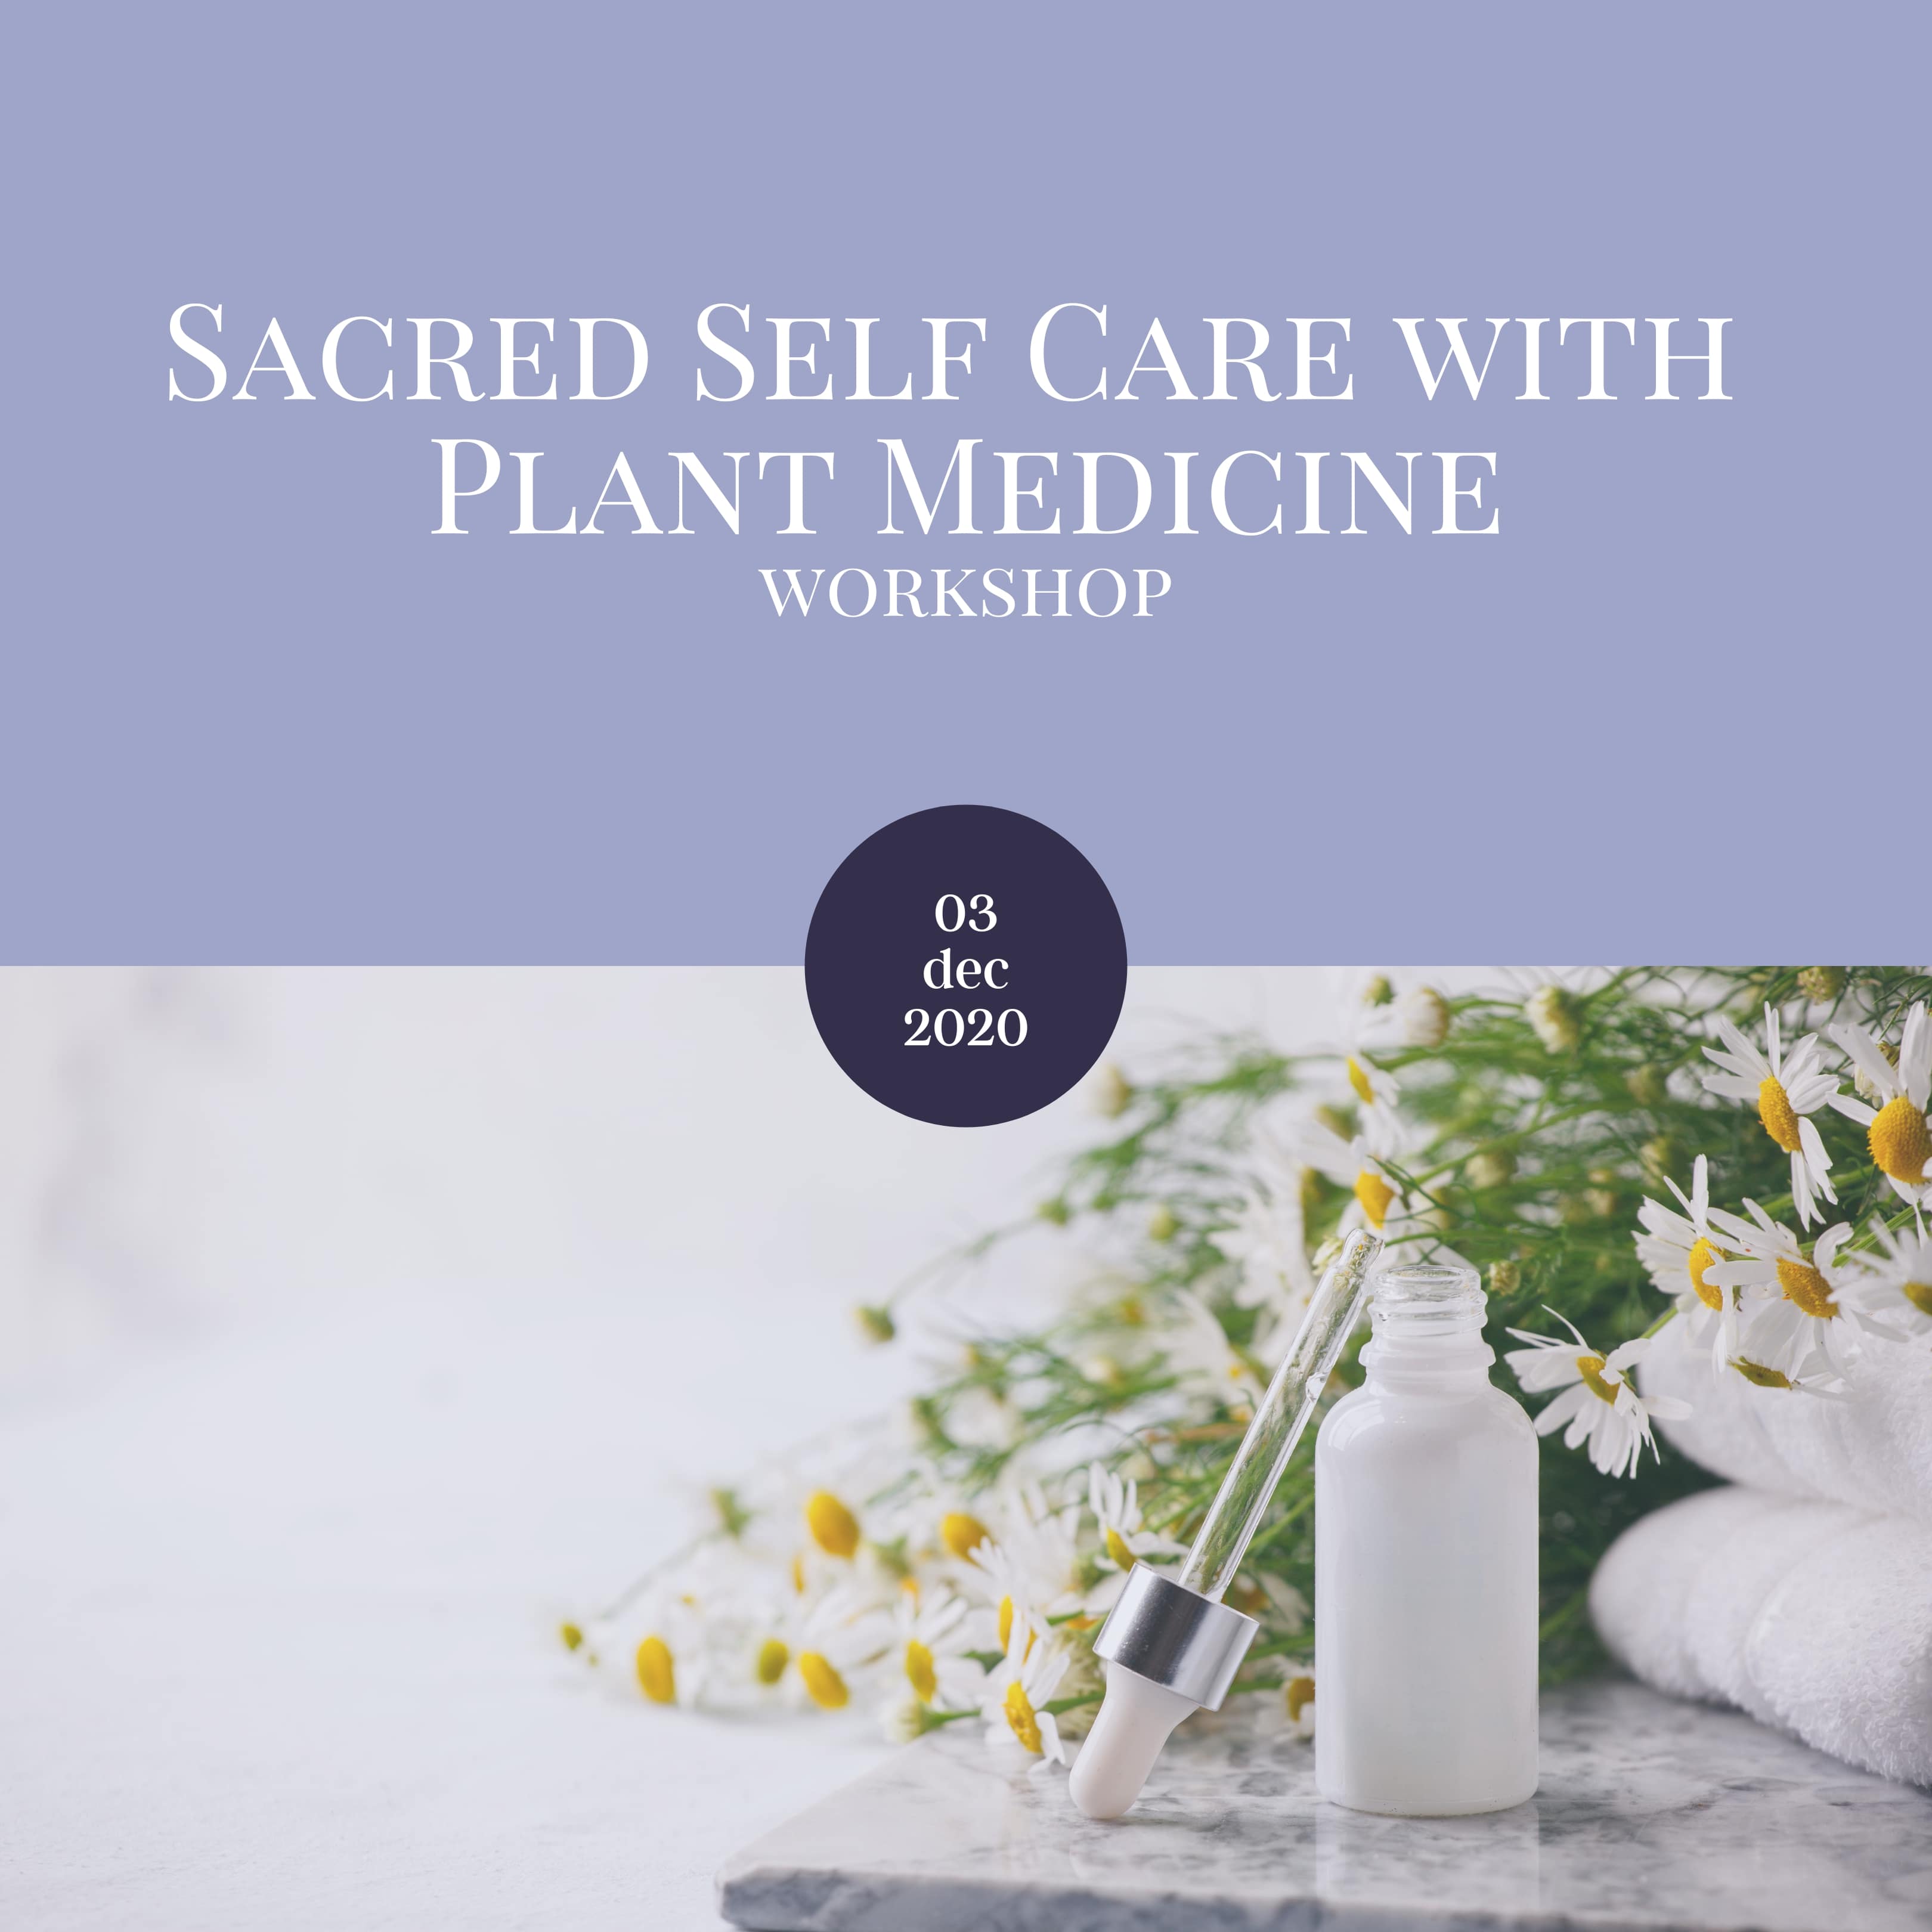 image from Sacred Self Care with Plant Medicine